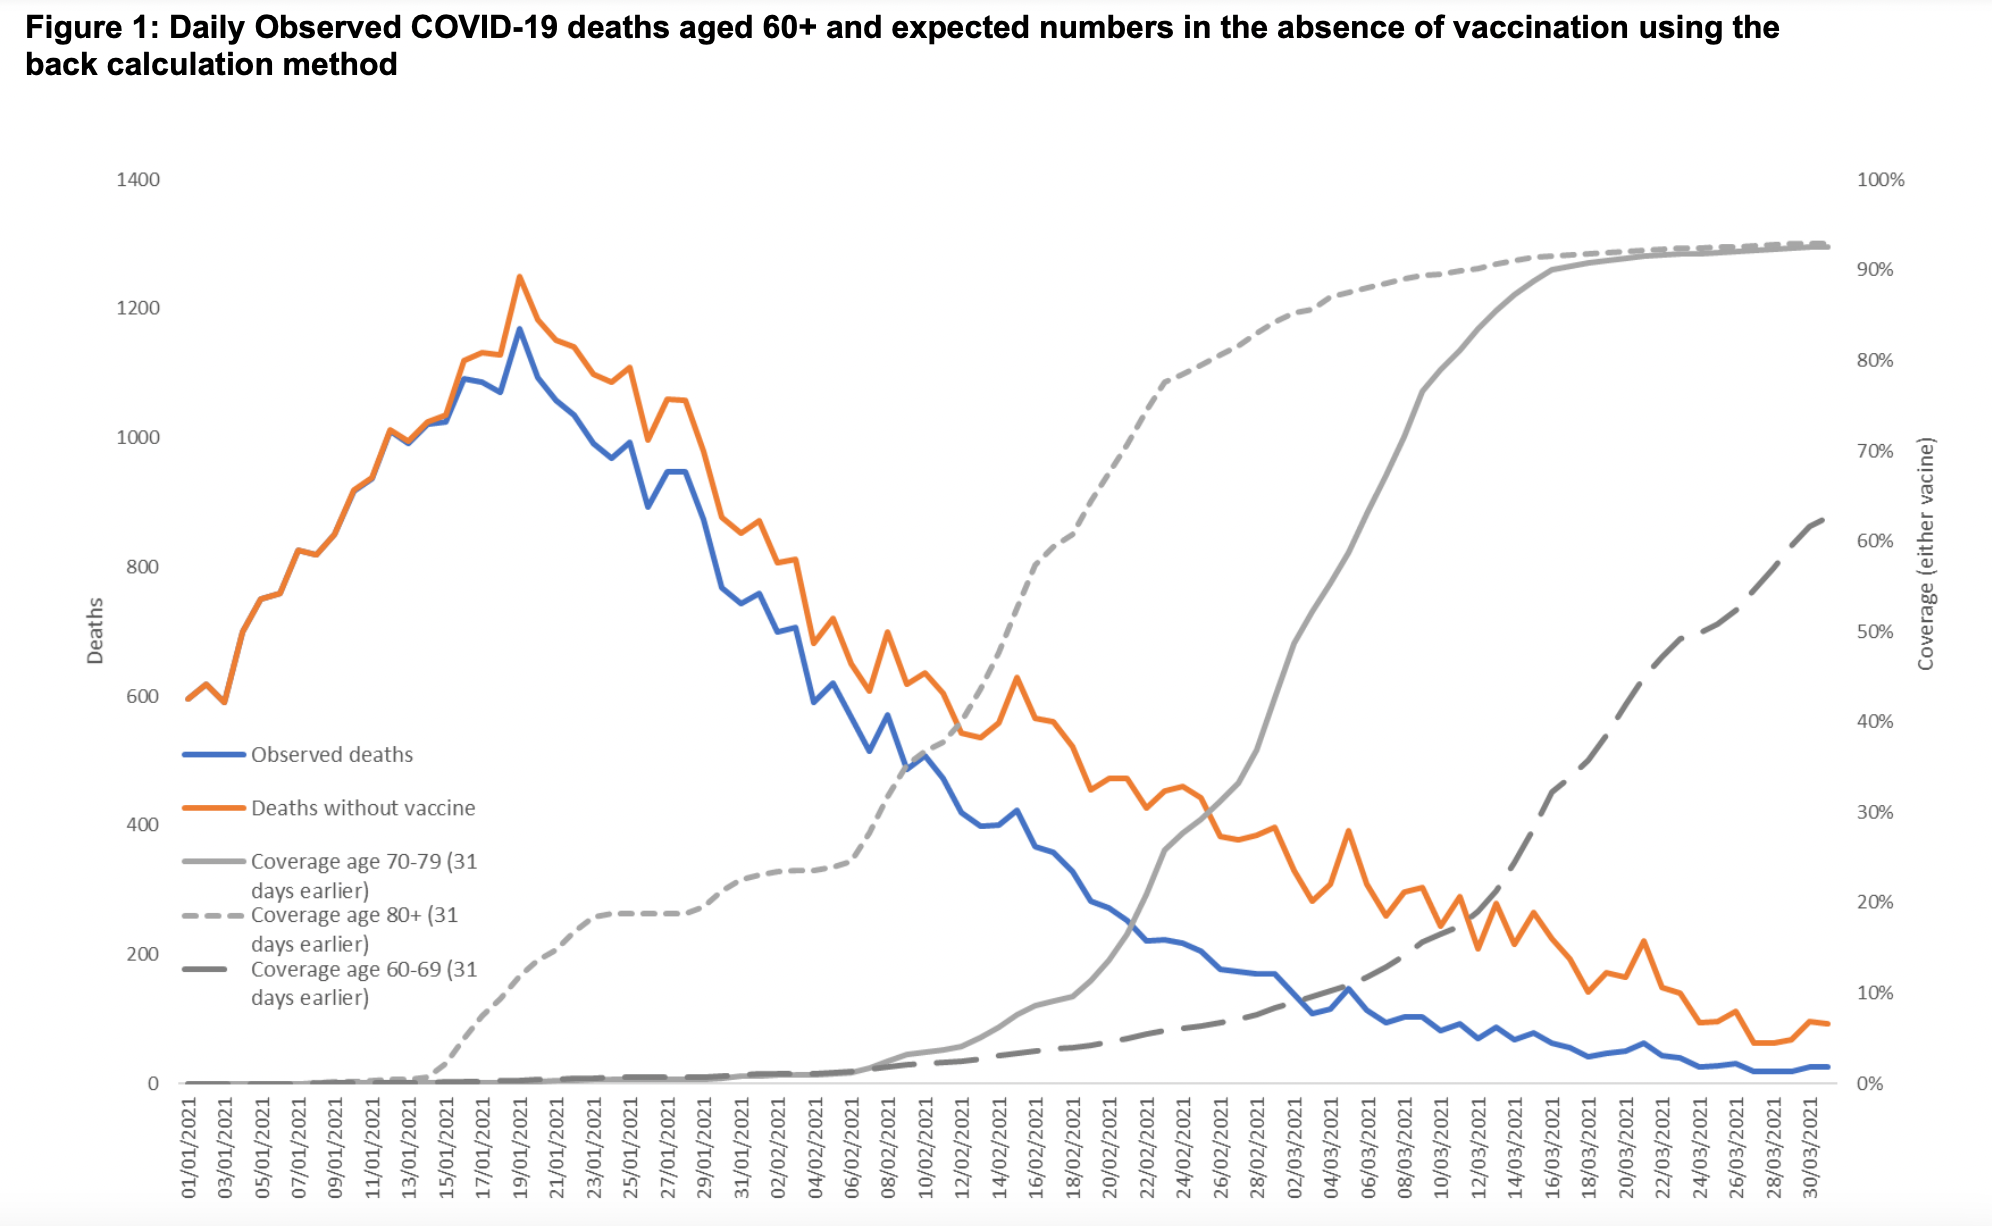 10,400 Covid deaths prevented between December and March